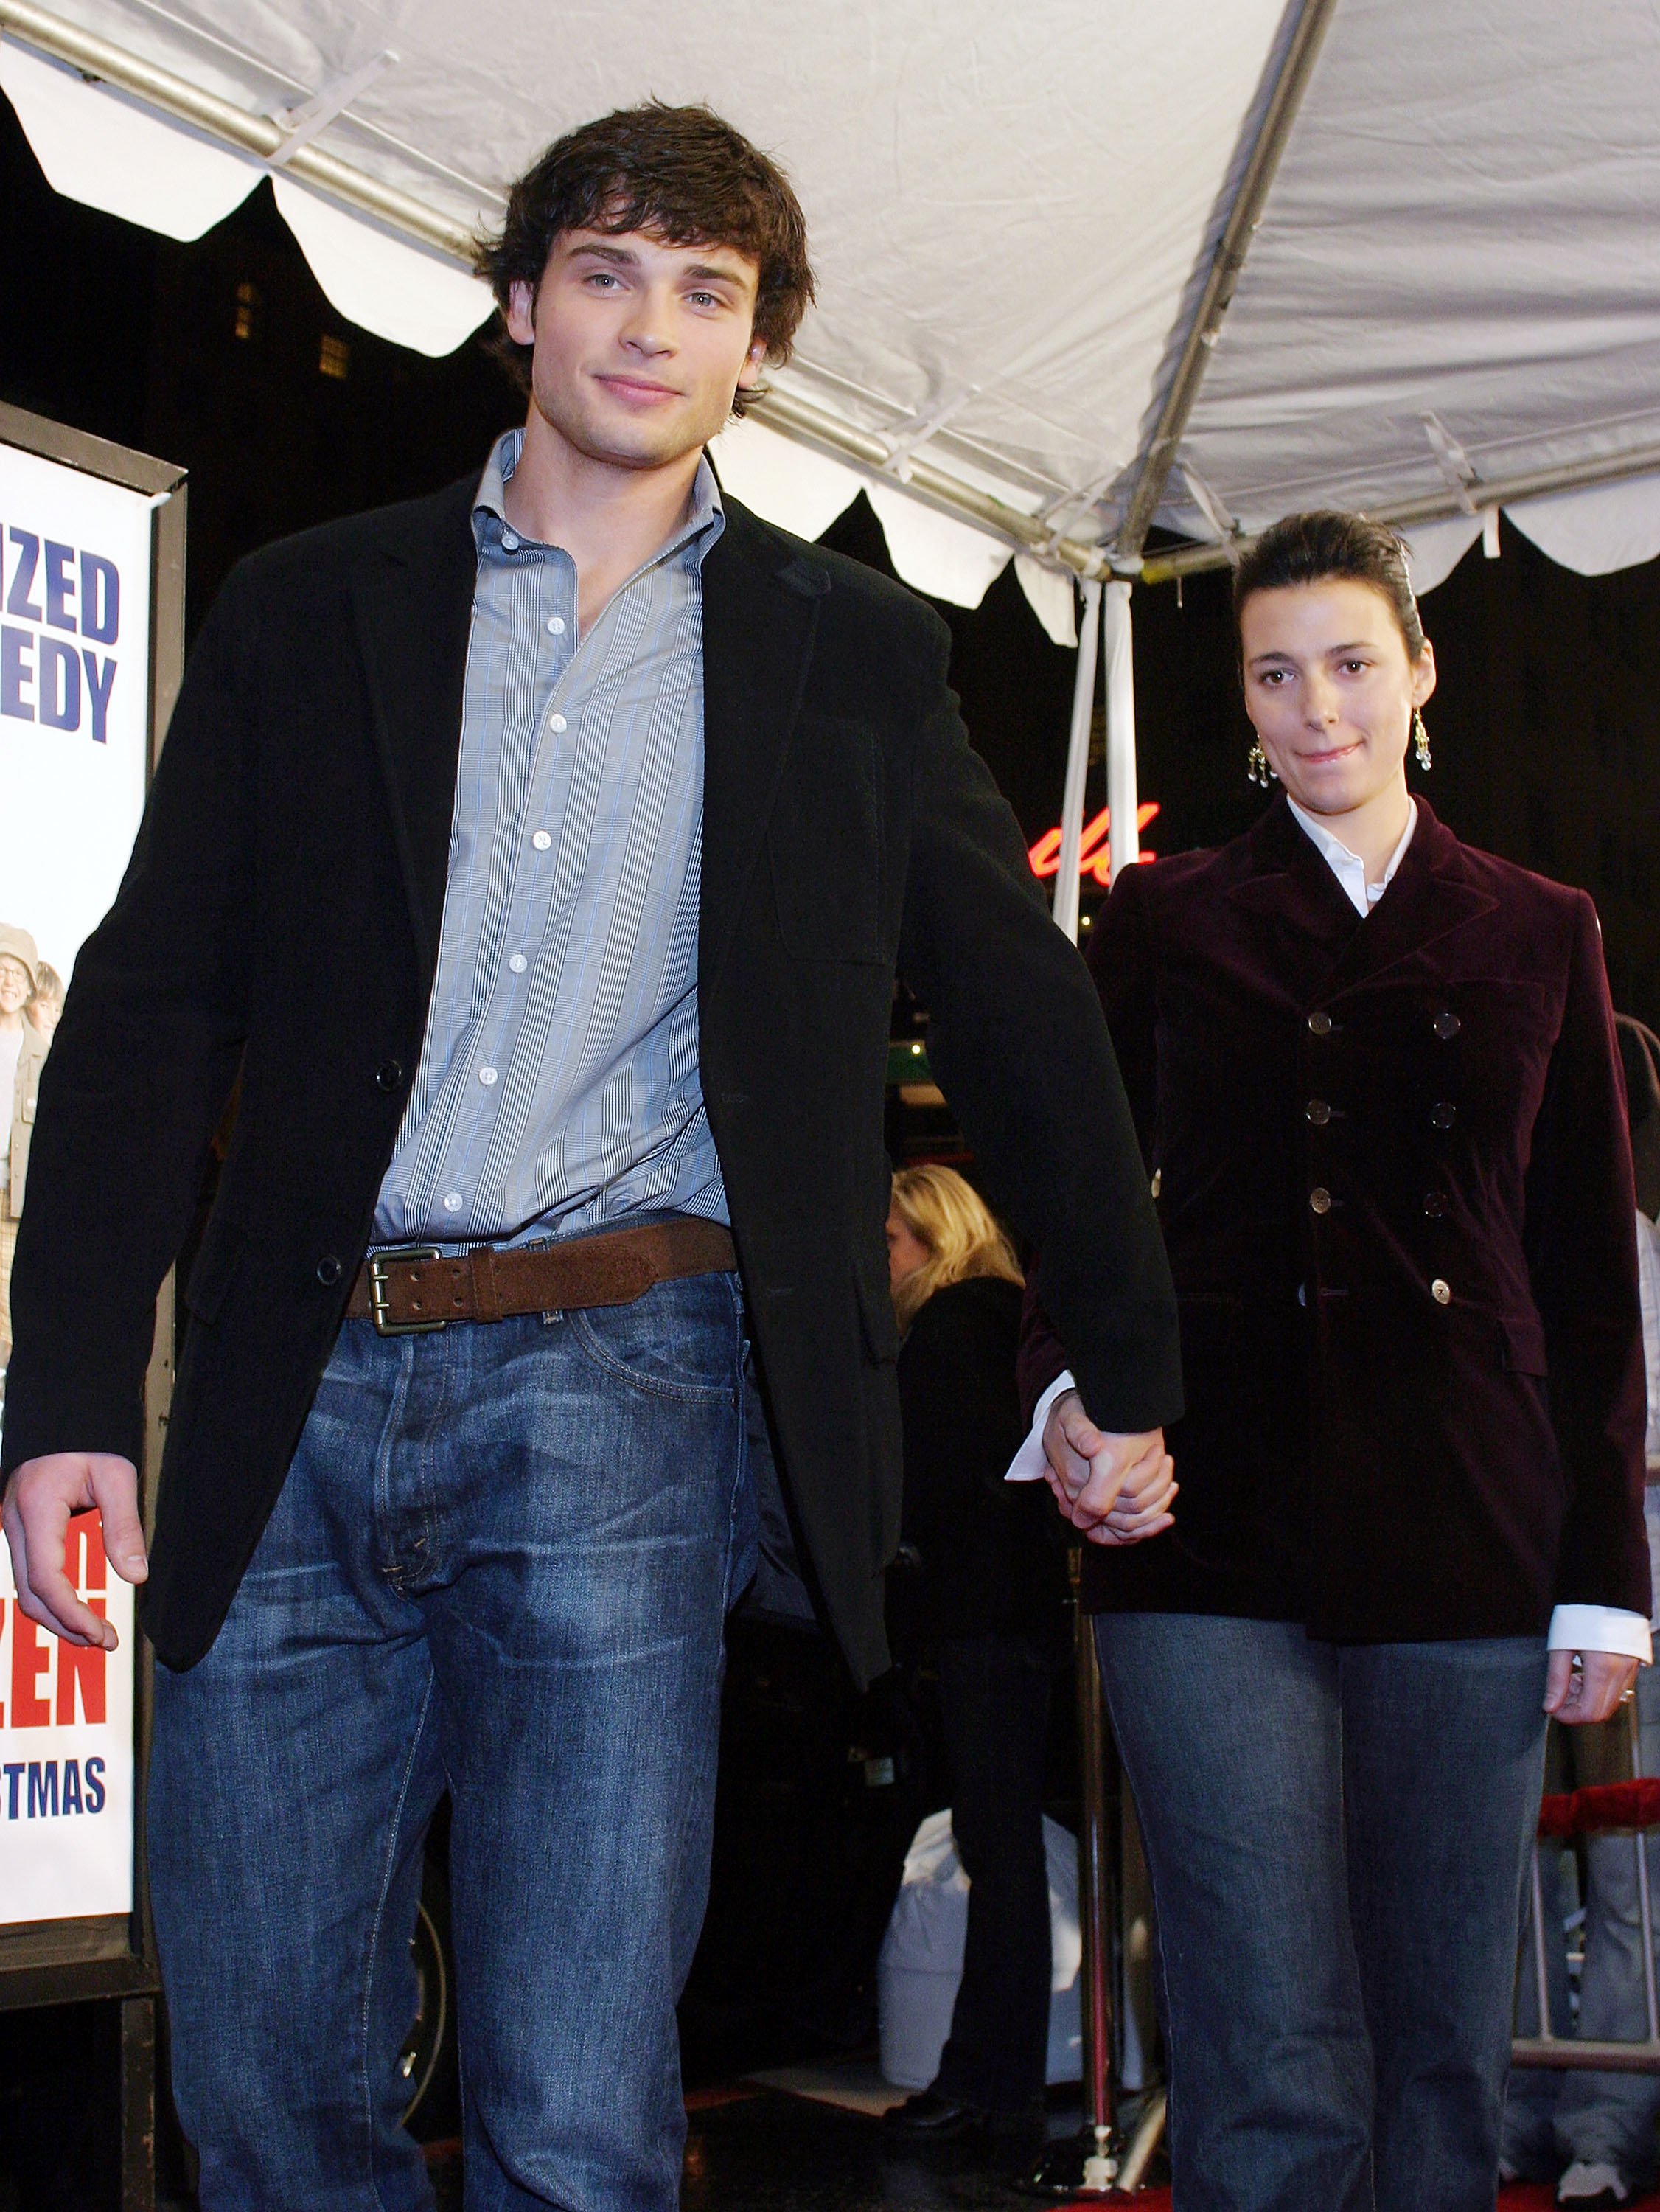 Tom Welling and Jamie White attend the "Cheaper By The Dozen" premiere on December 14, 2003 in Hollywood, California. Photo: Getty Images